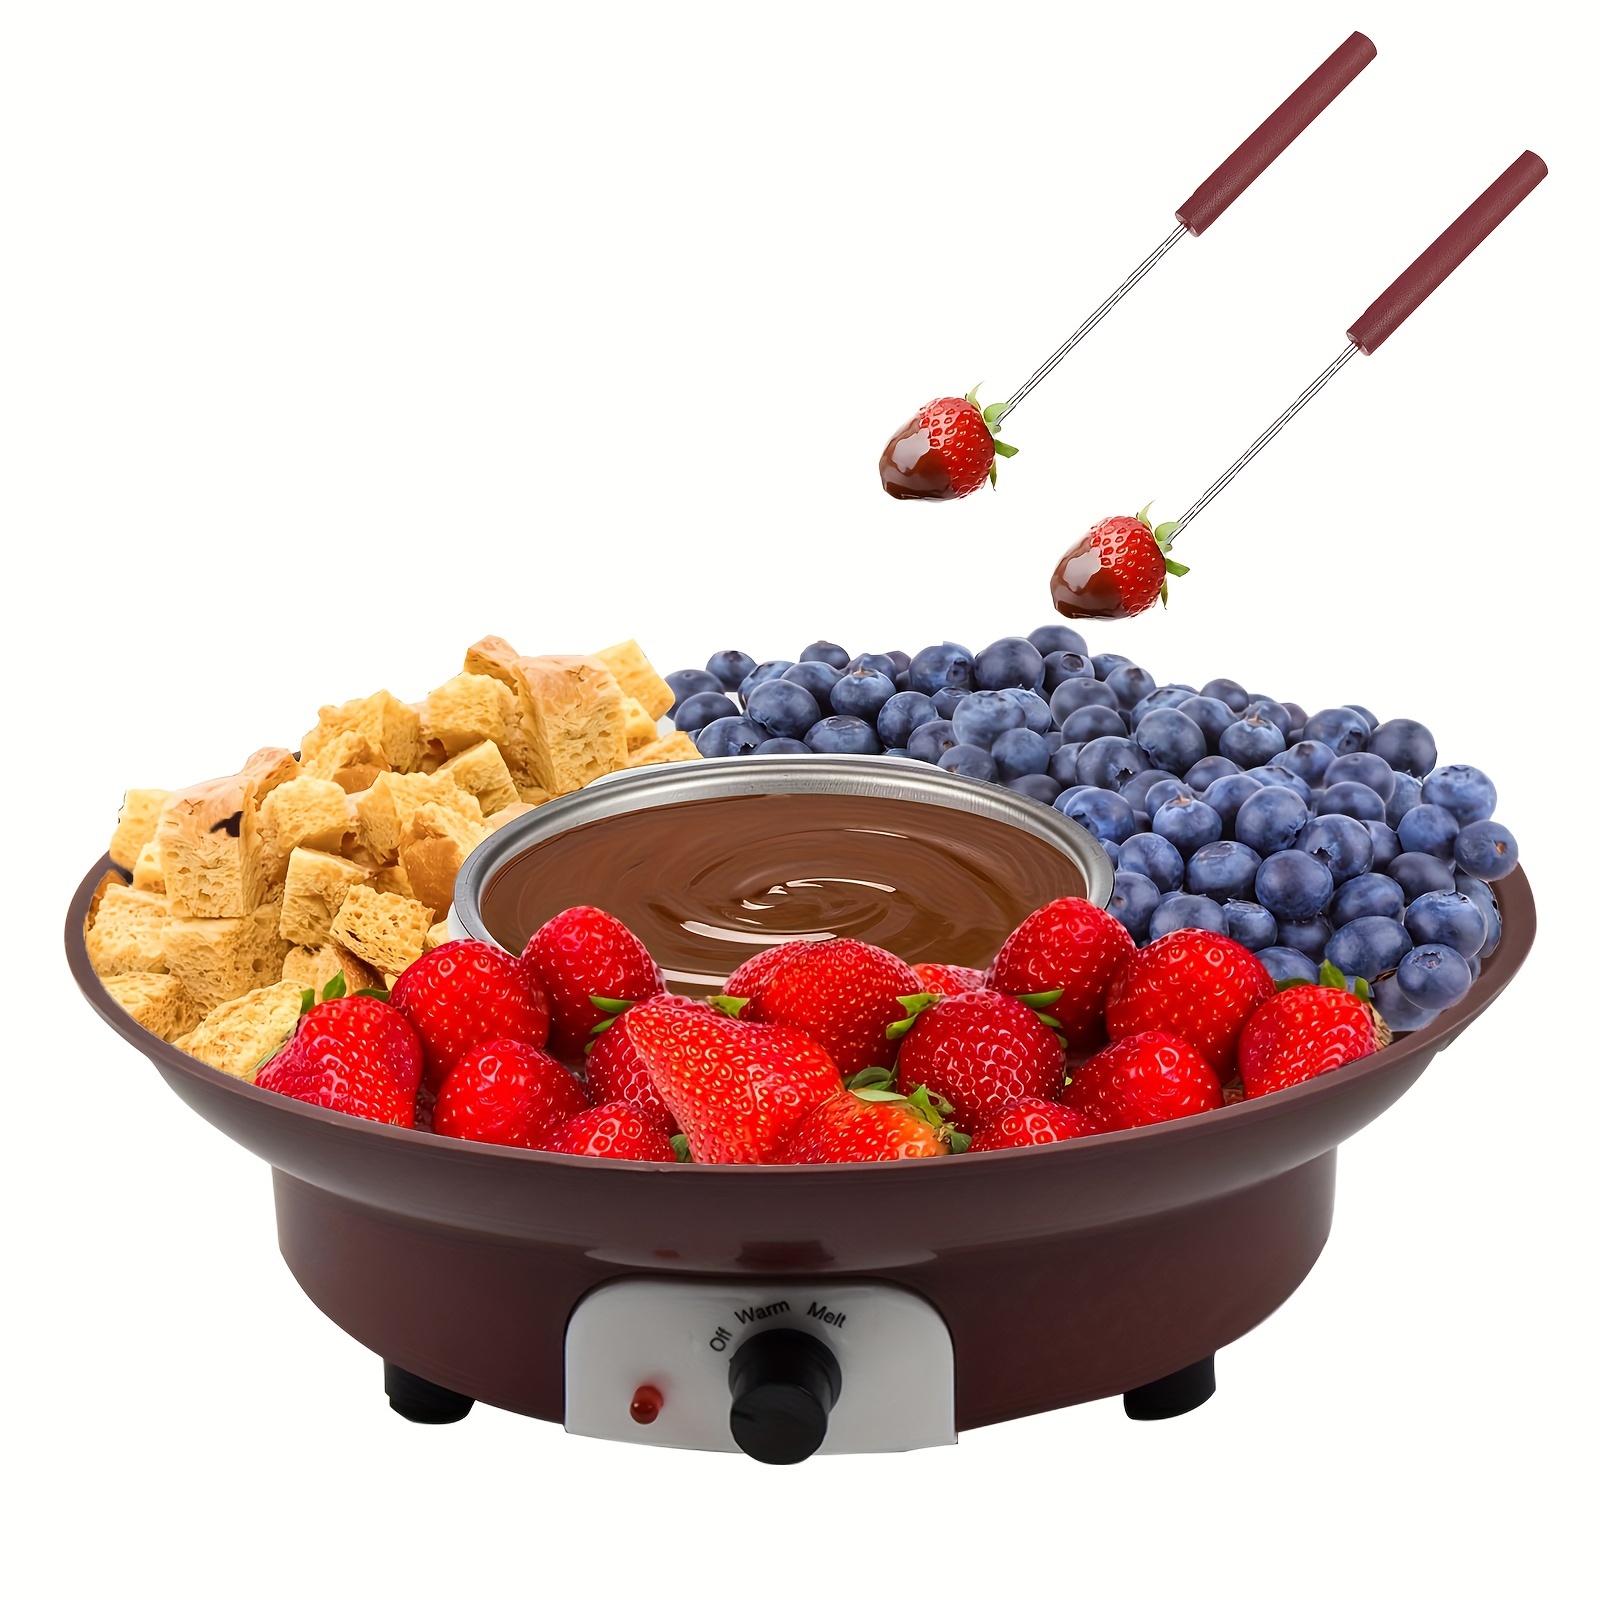  OFFKITSLY Fondue Pot Set, Mini Electric Fondue Pot Set for  Melting Chocolate Cheese, Chocolate Meting Pot fondue maker with Dipping  Forks For Holiday Christmas Birthday Gift : Home & Kitchen